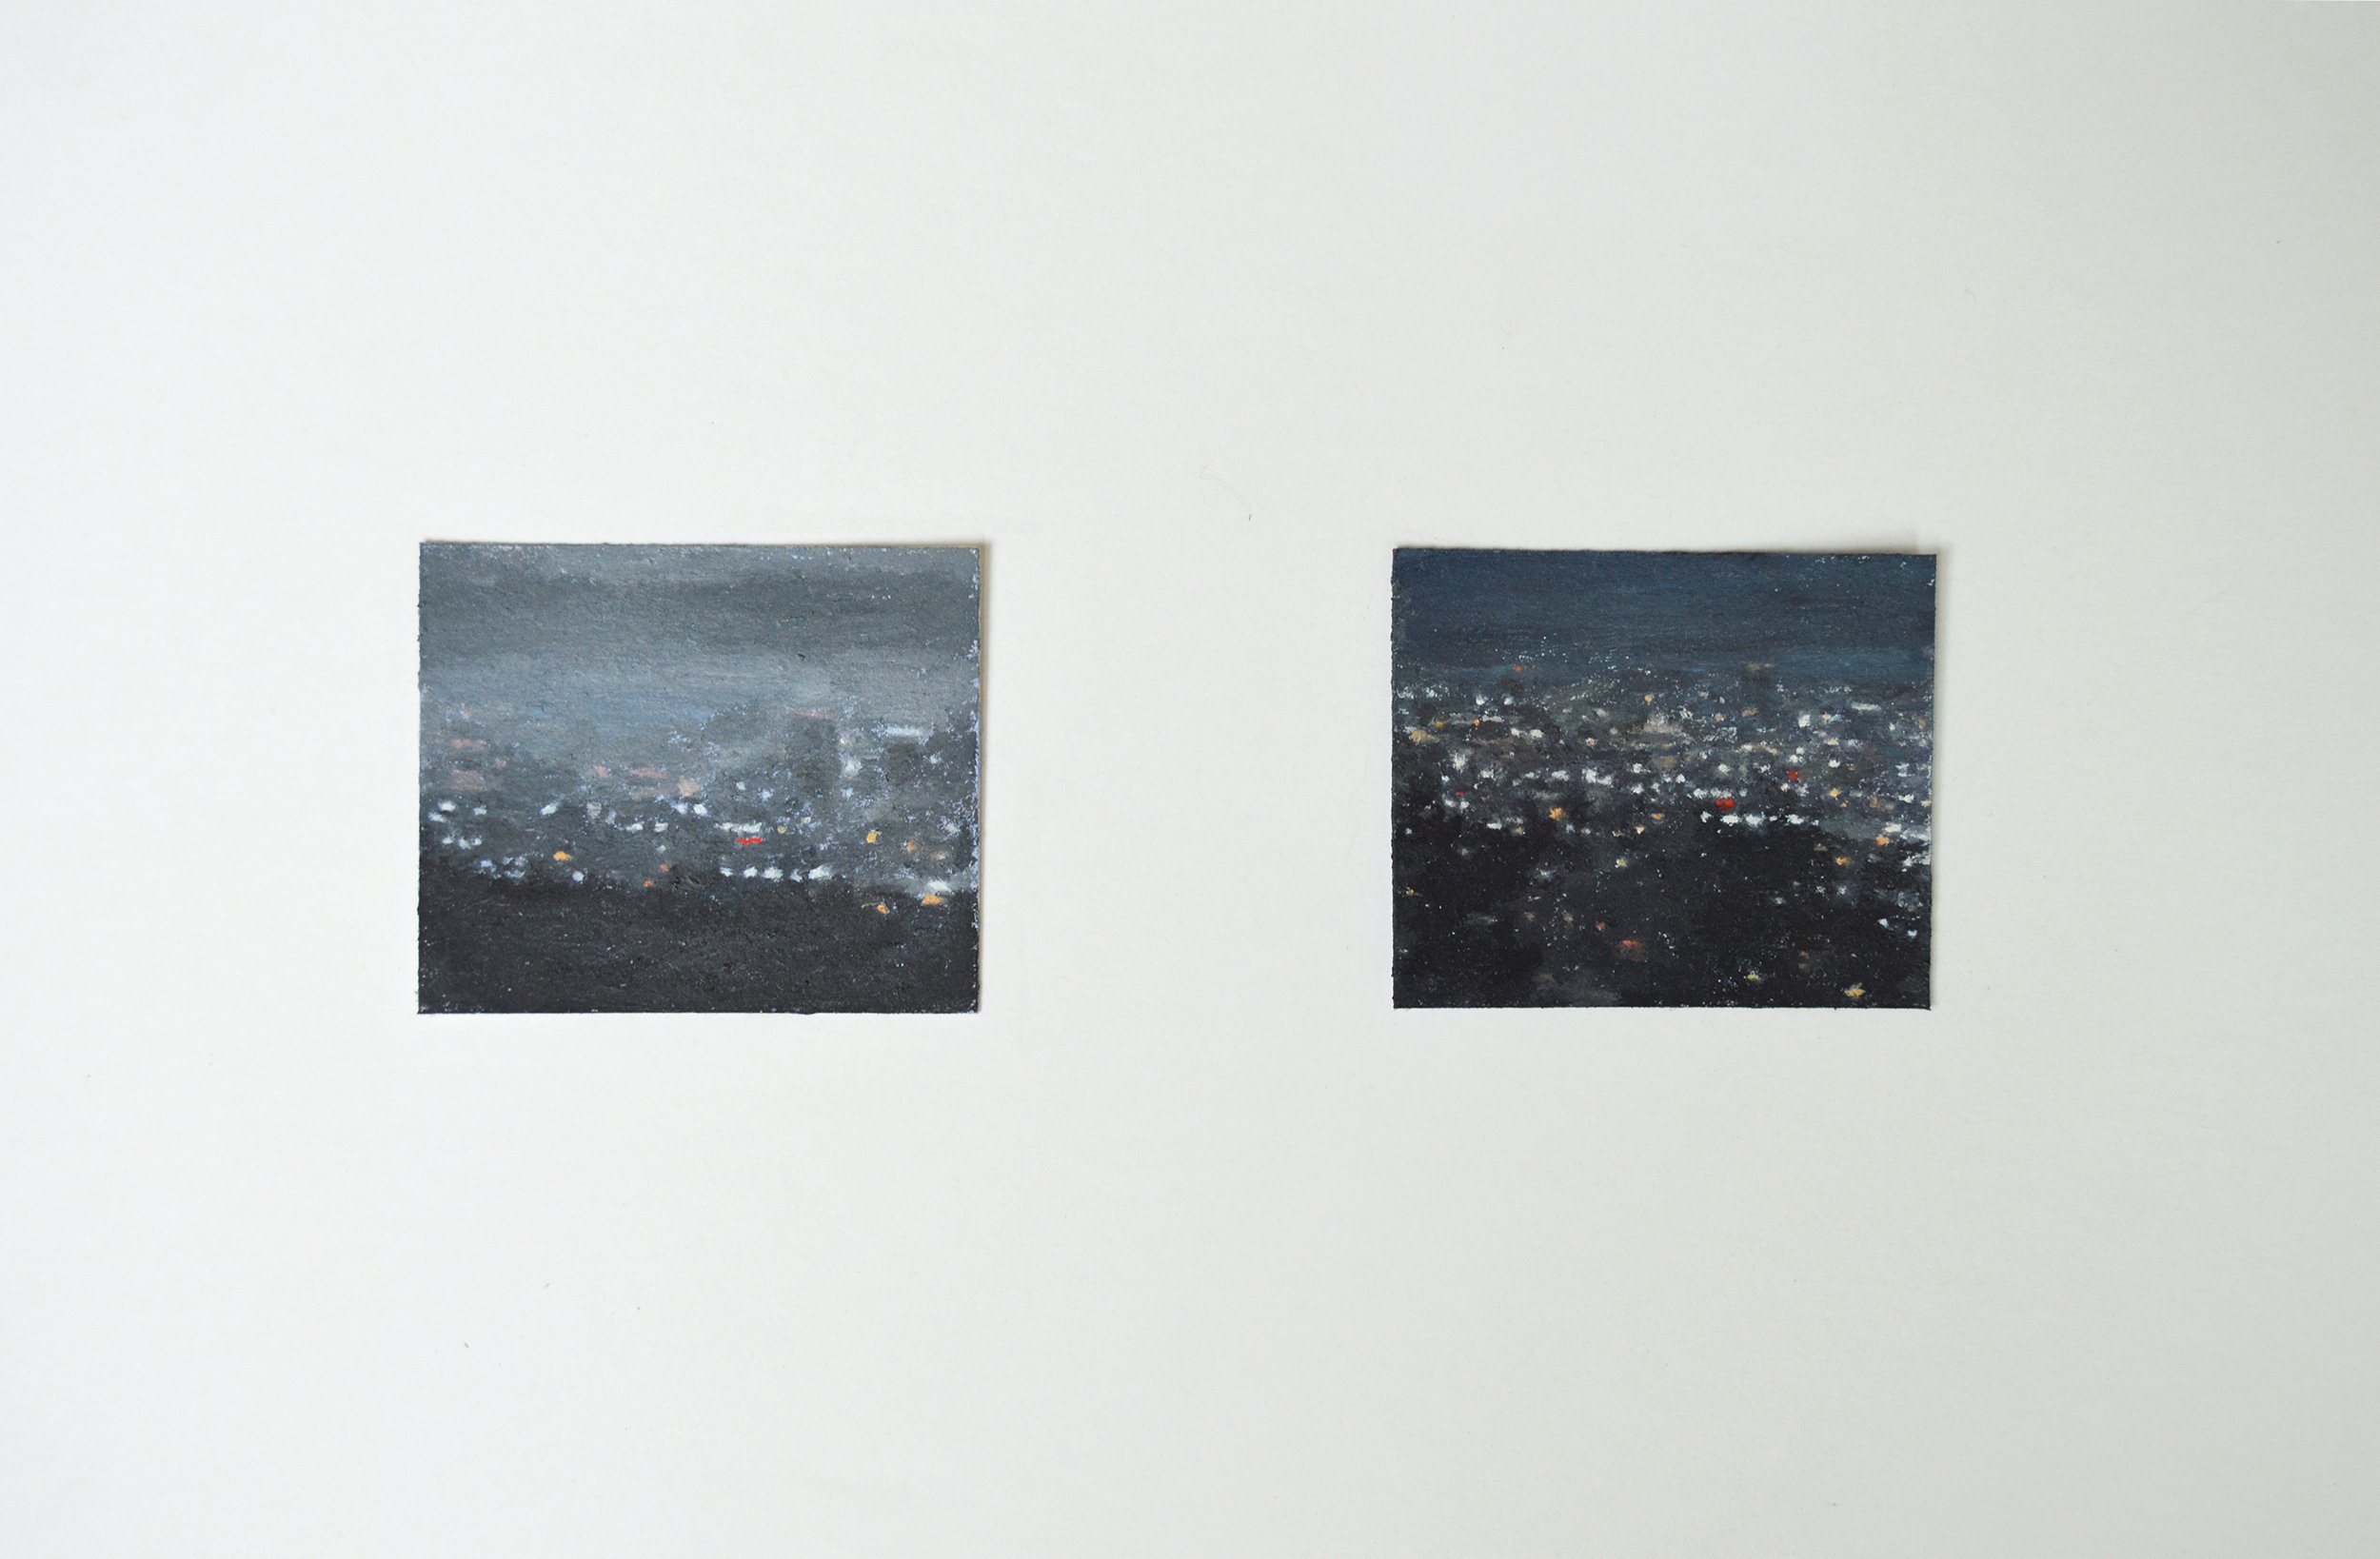  Untitled (Night Sky Series), Dimensions Variable, 2021-2022 